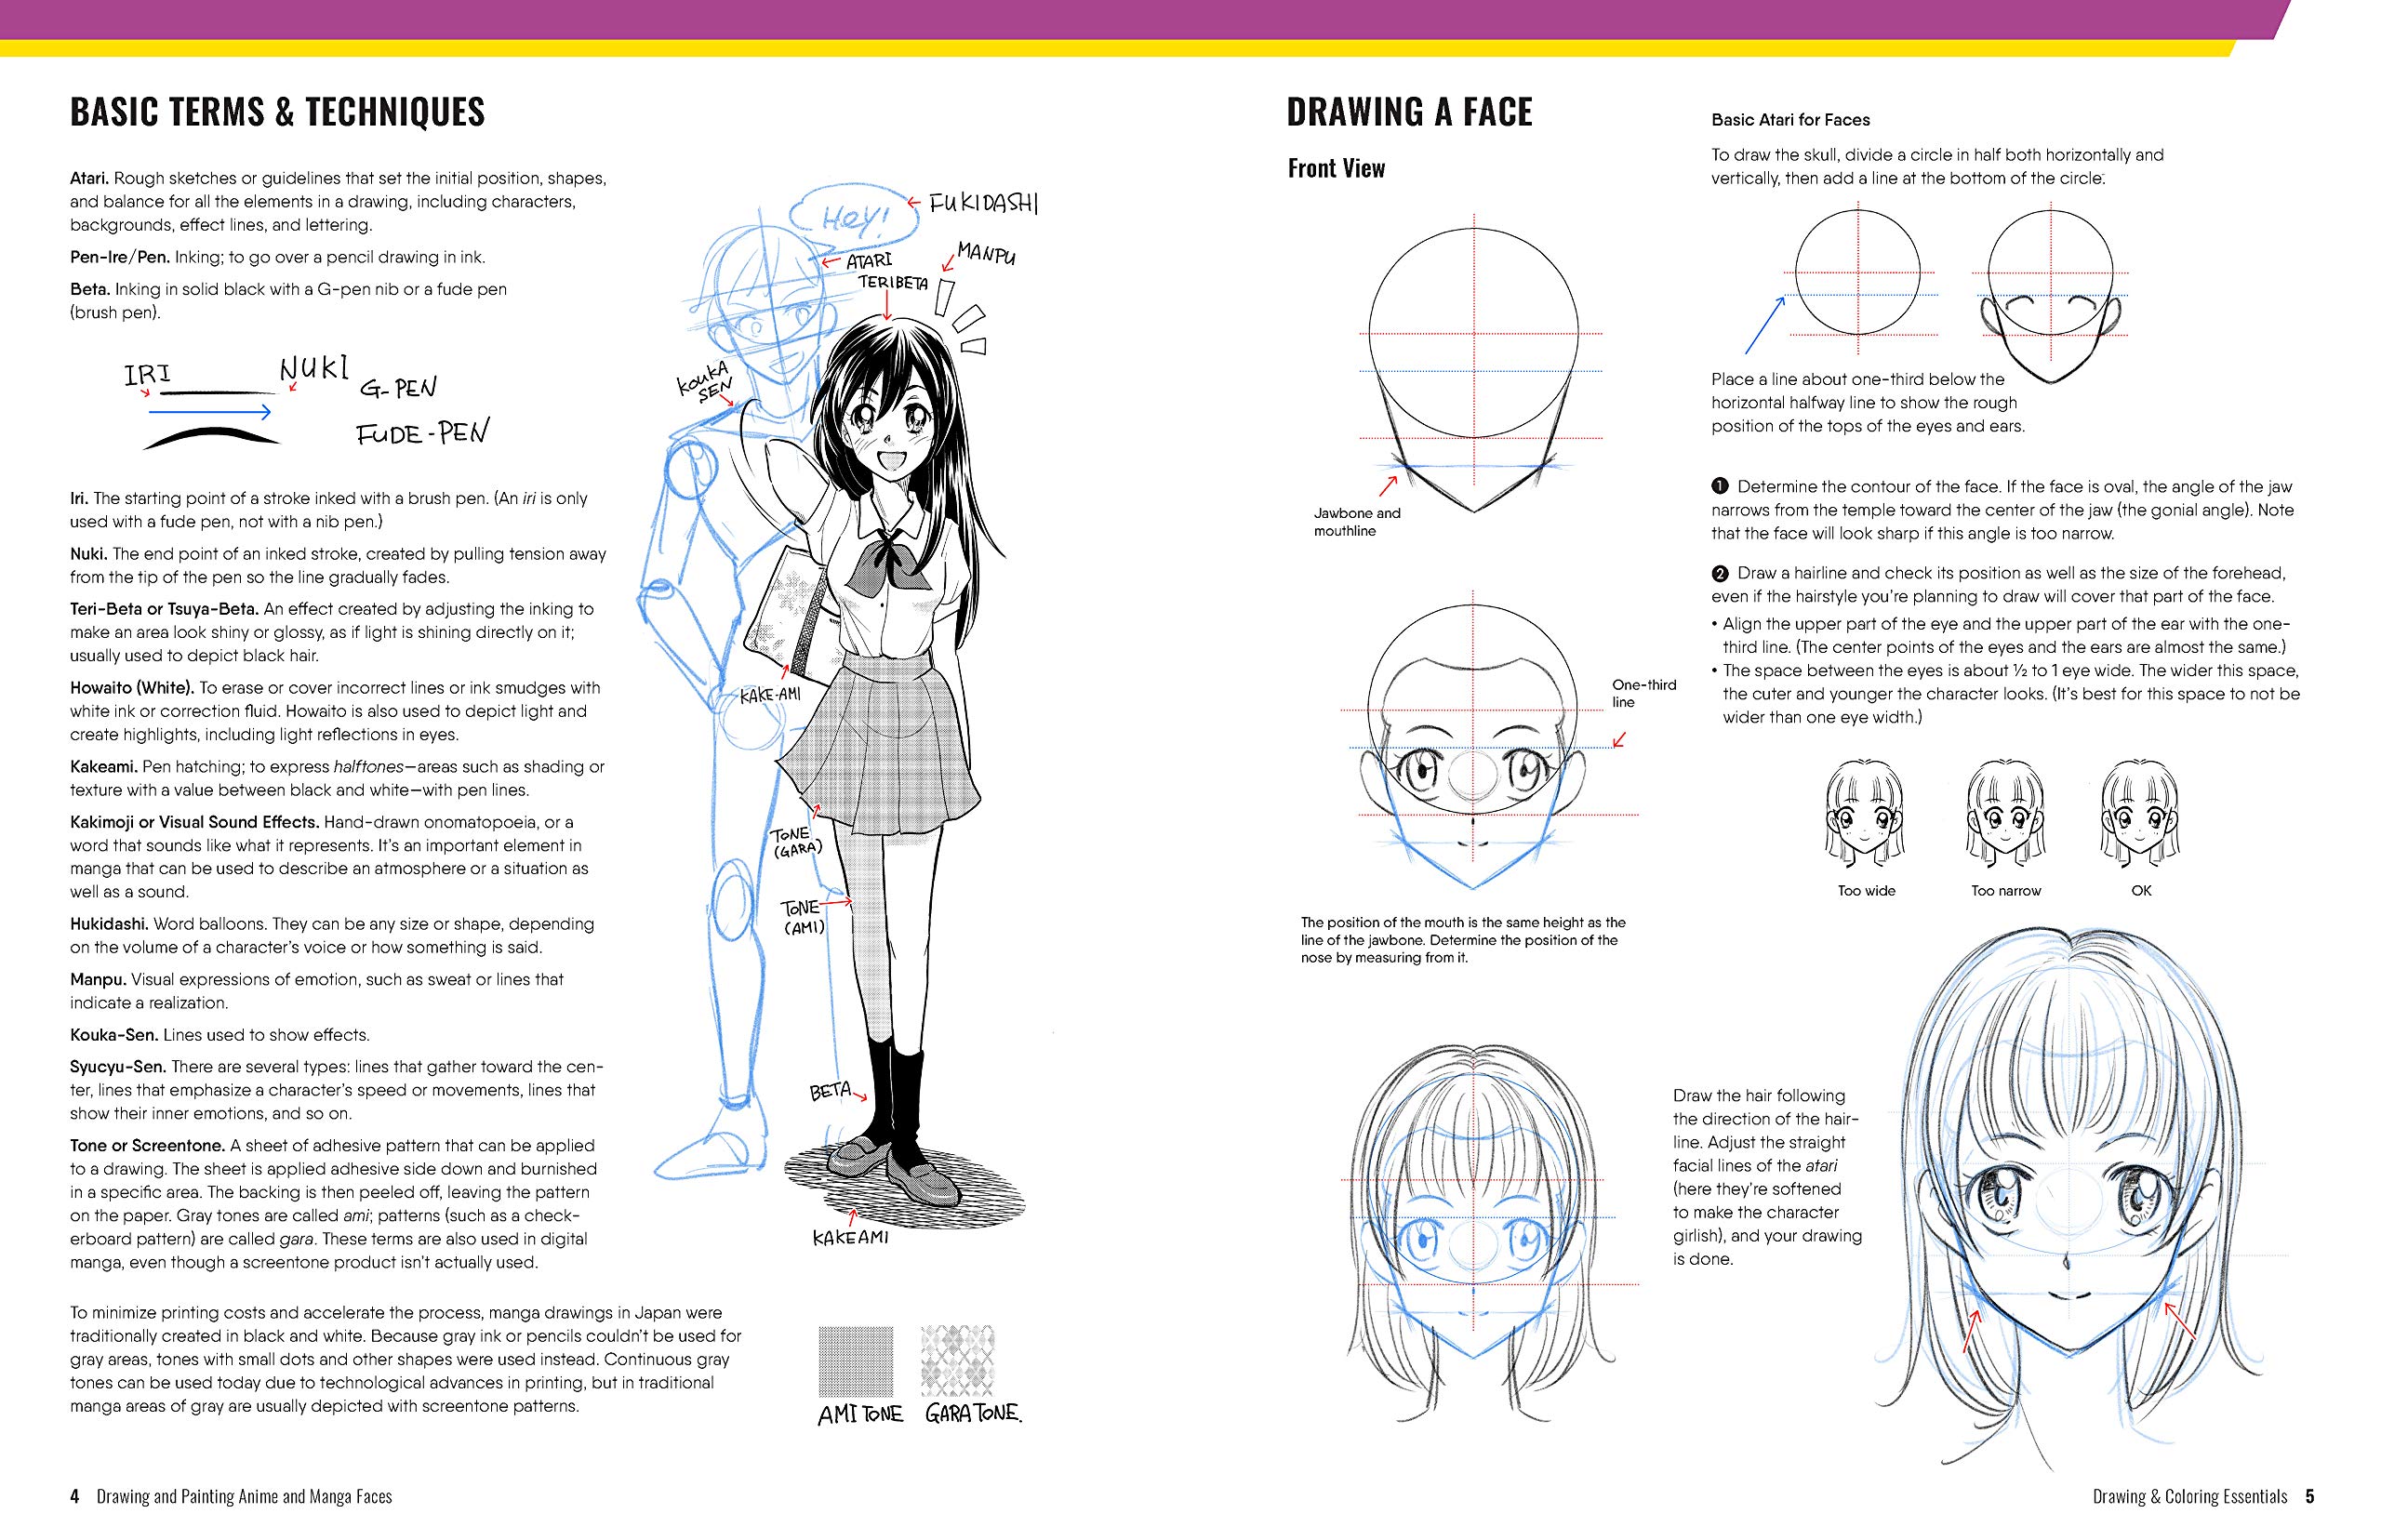 10 Things You Need to Know to Be a Better Manga Artist – Seej B Draw